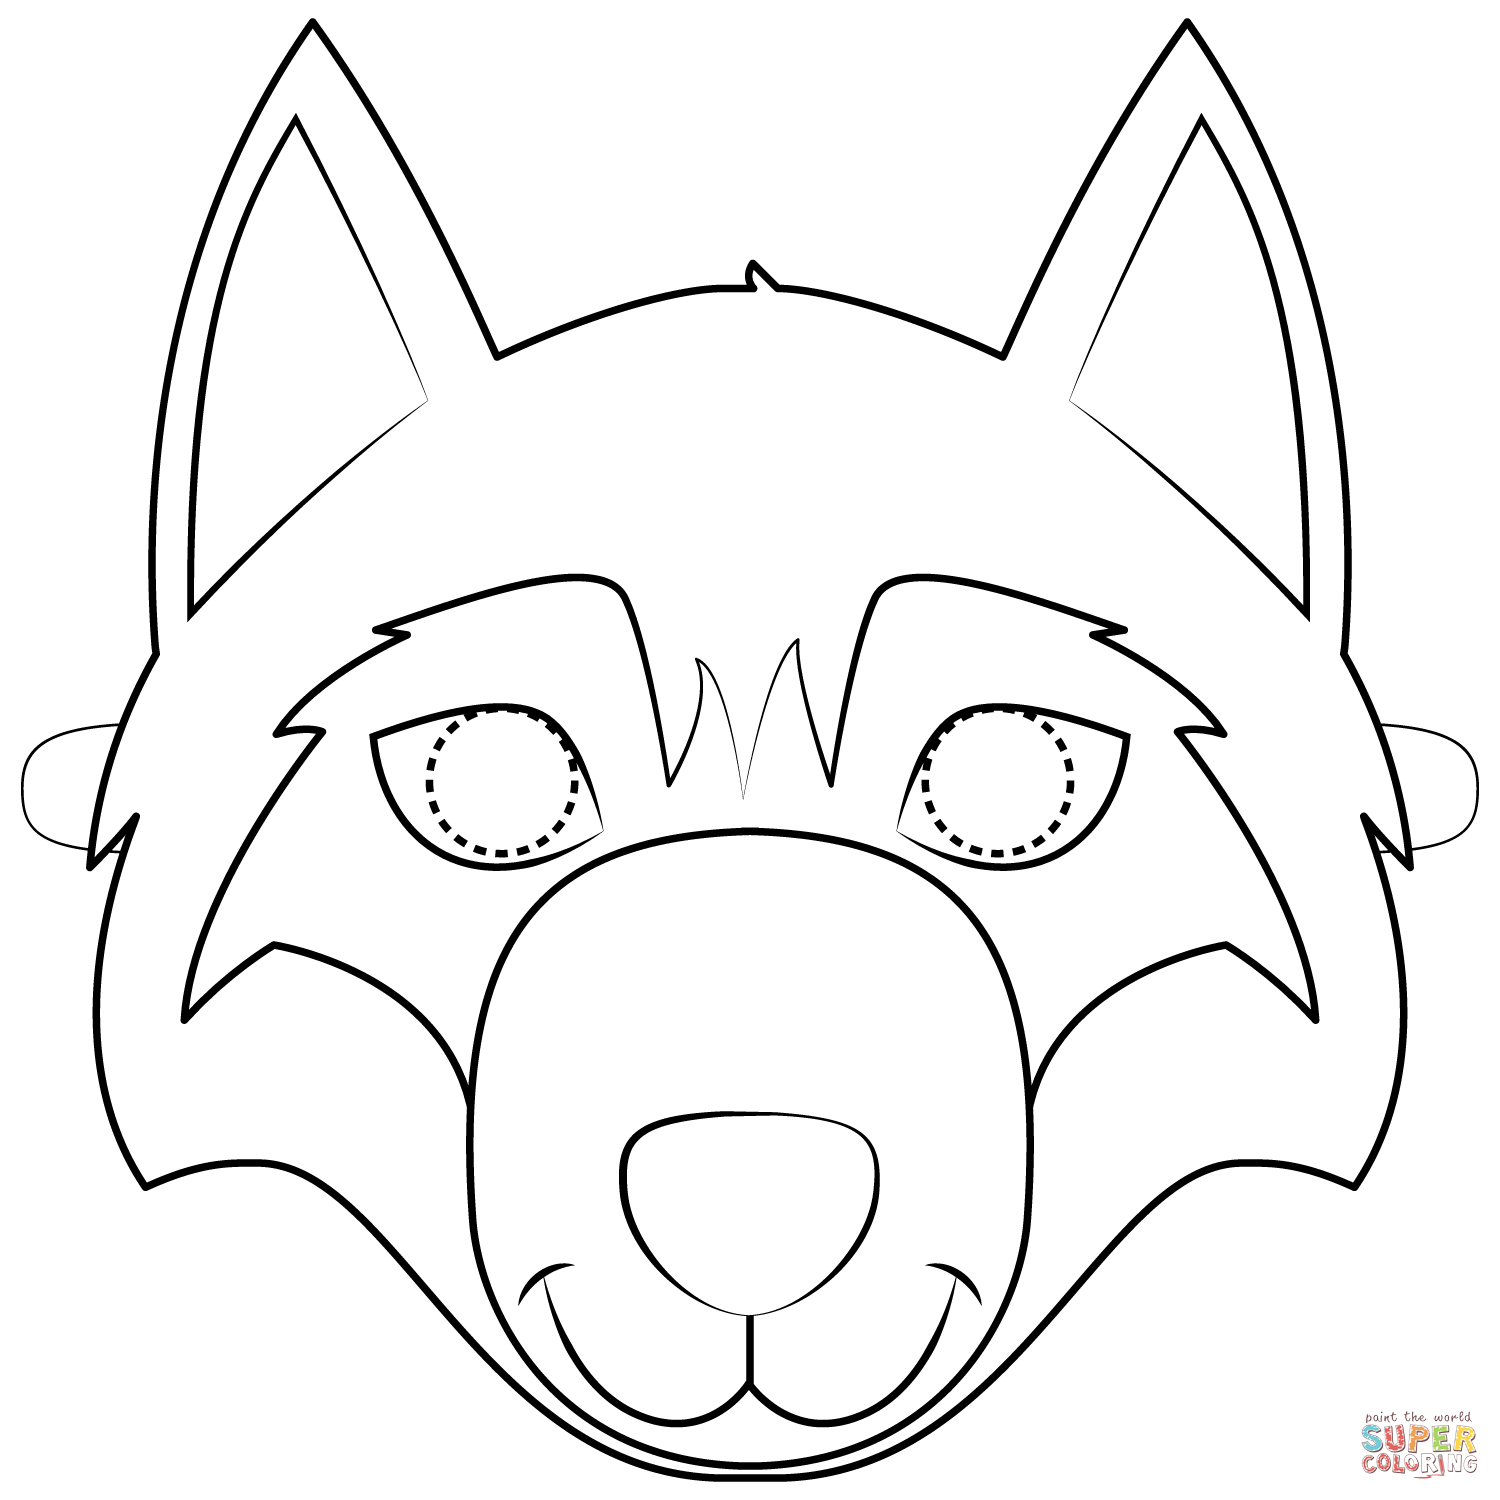 Wolf Mask Coloring Page | Free Printable Coloring Pages - Free Printable Wolf Face Mask